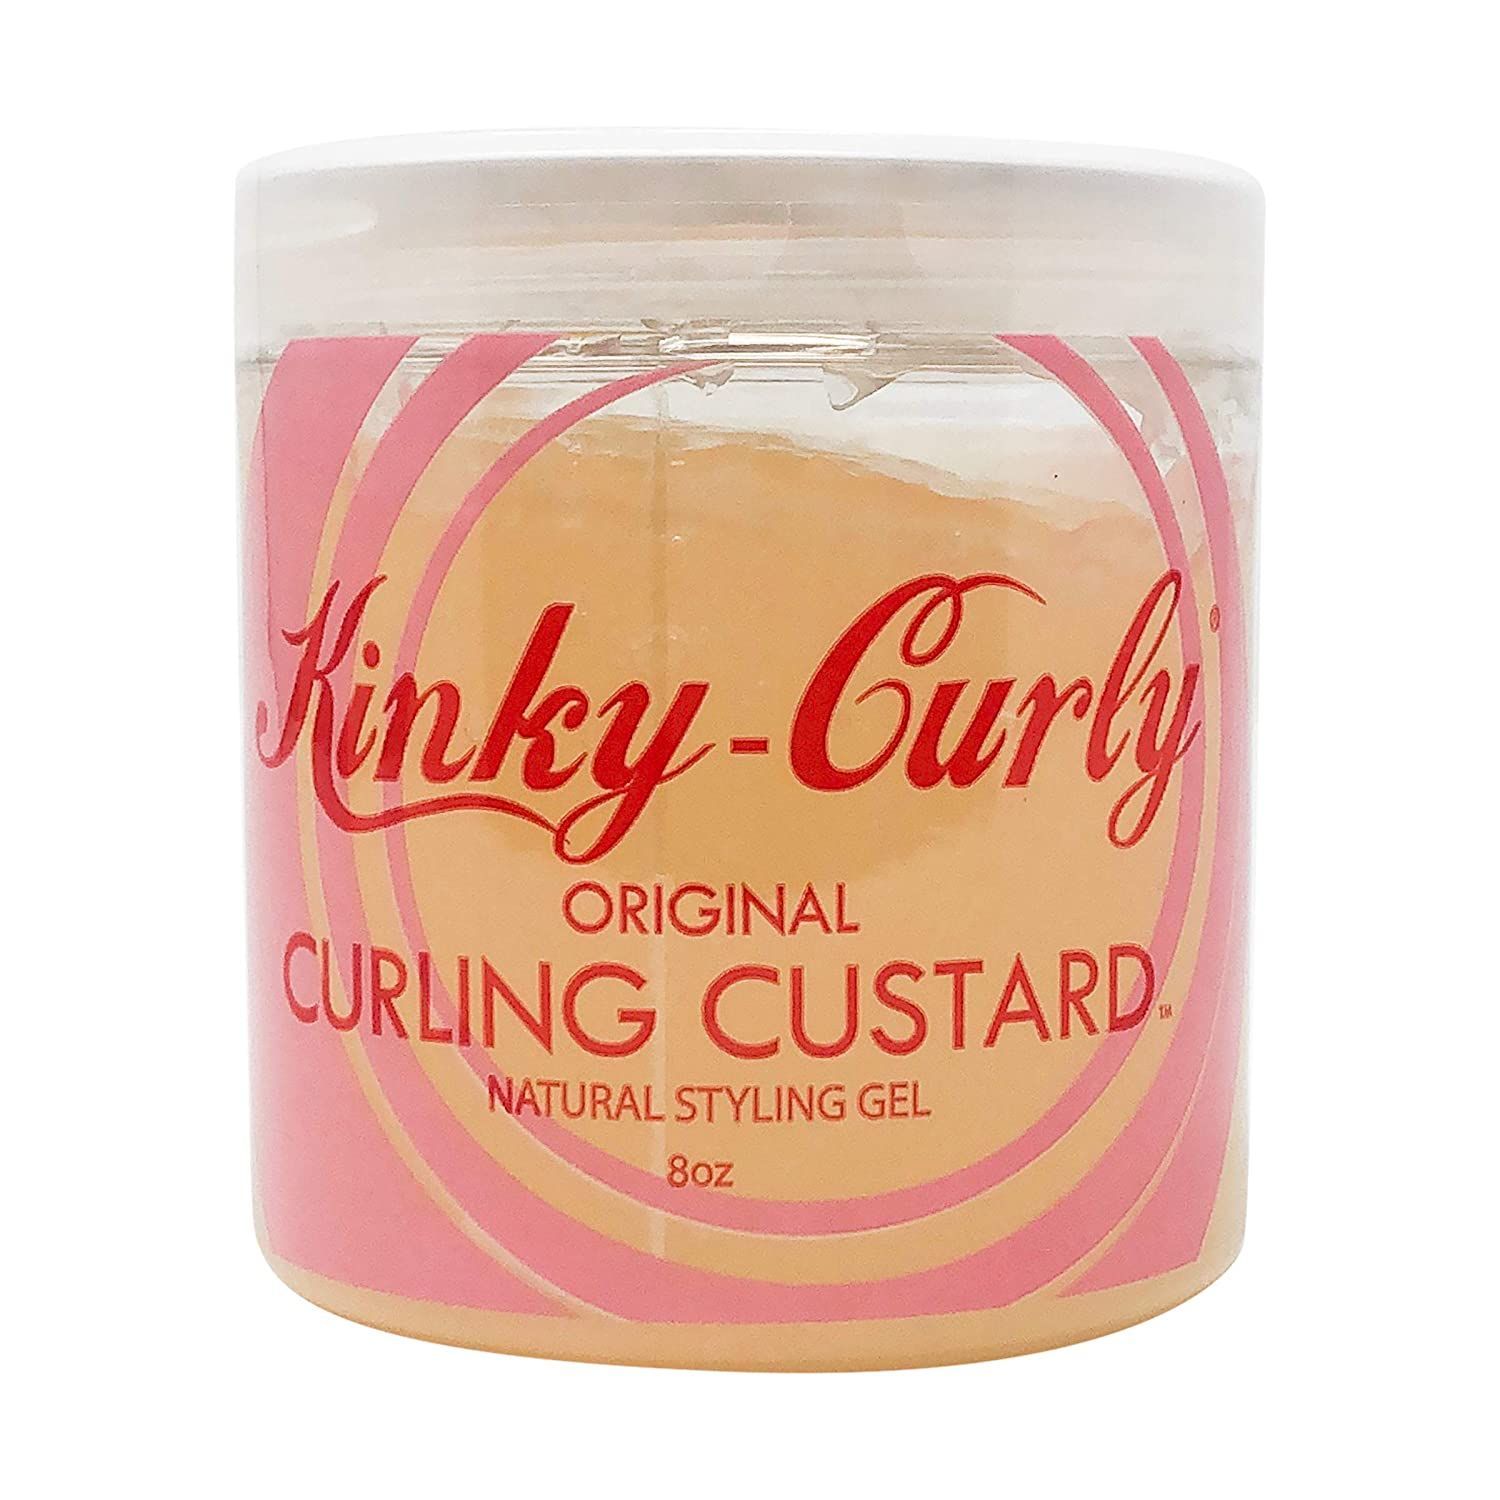 Best Hair Styling Gel for Women With Natural Hair and Curly Hair